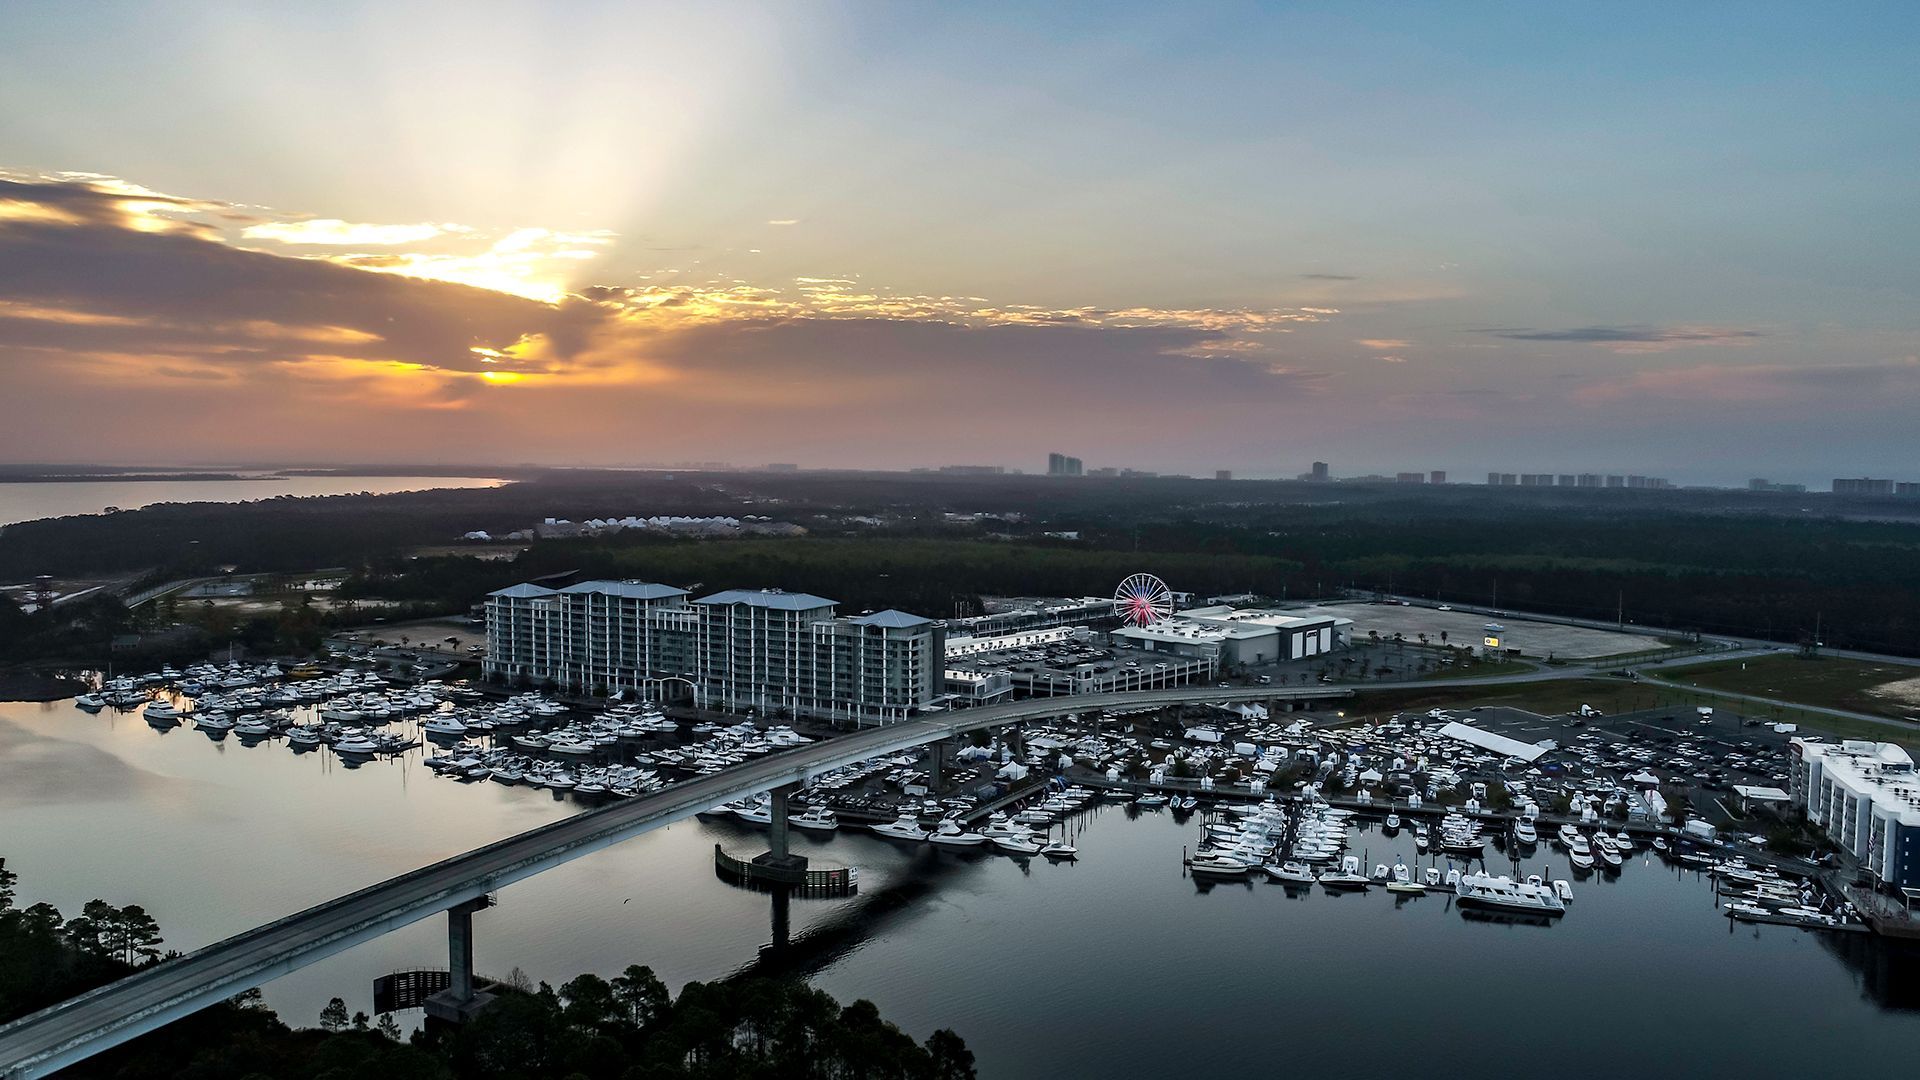 News about the boat show in Gulf Shores